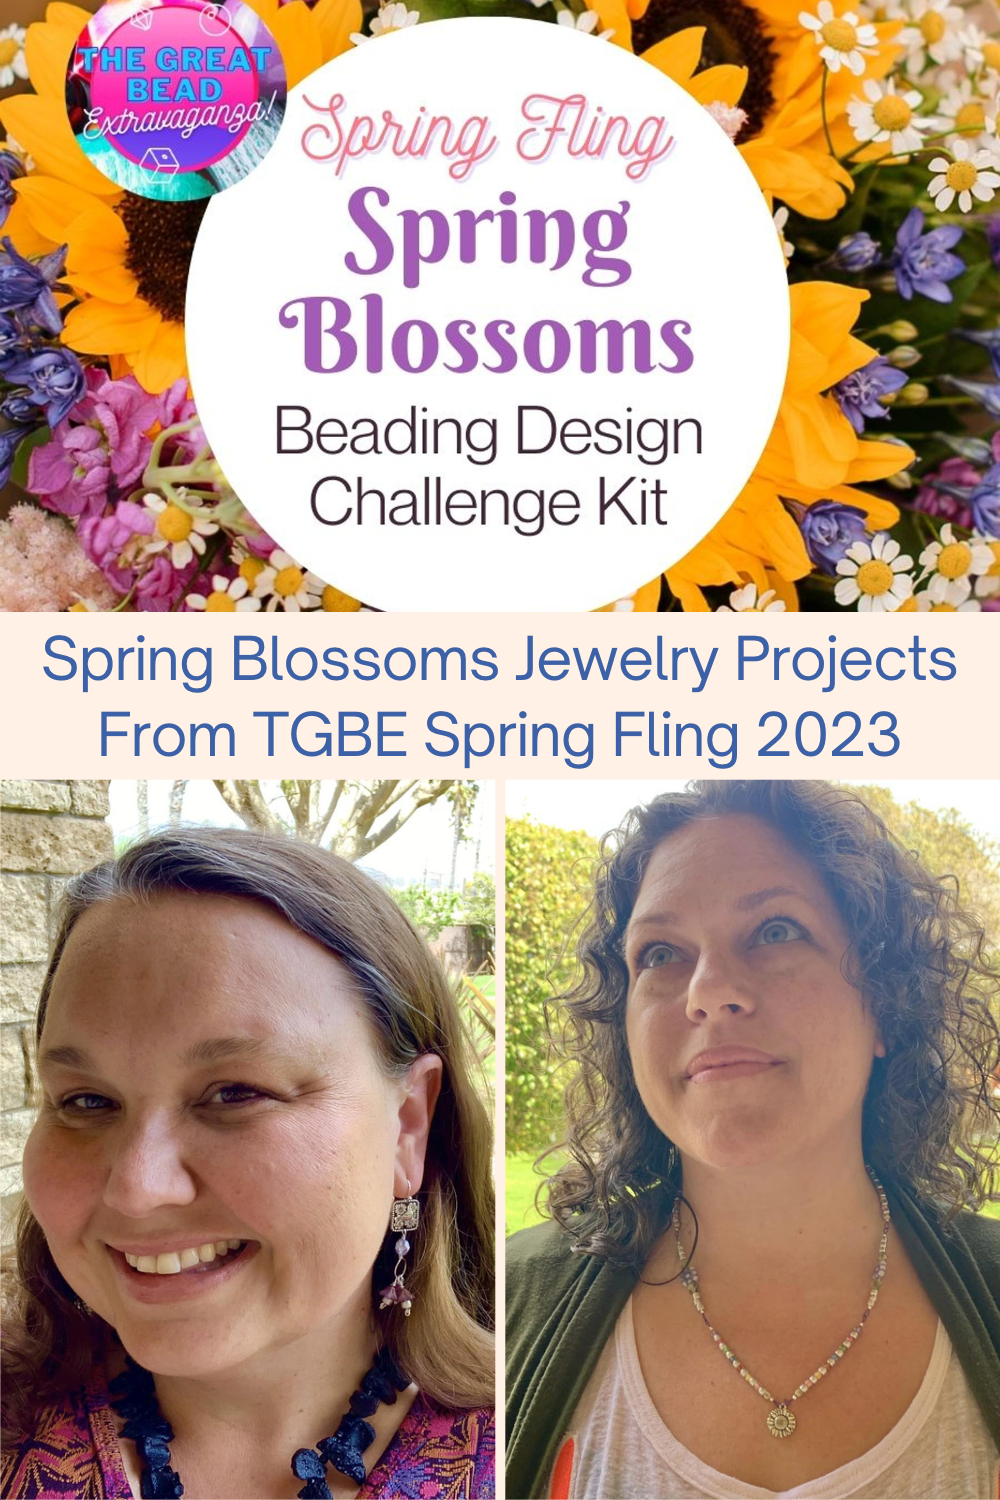 Spring Blossoms Jewelry Projects From TGBE Spring Fling 2023 Collage